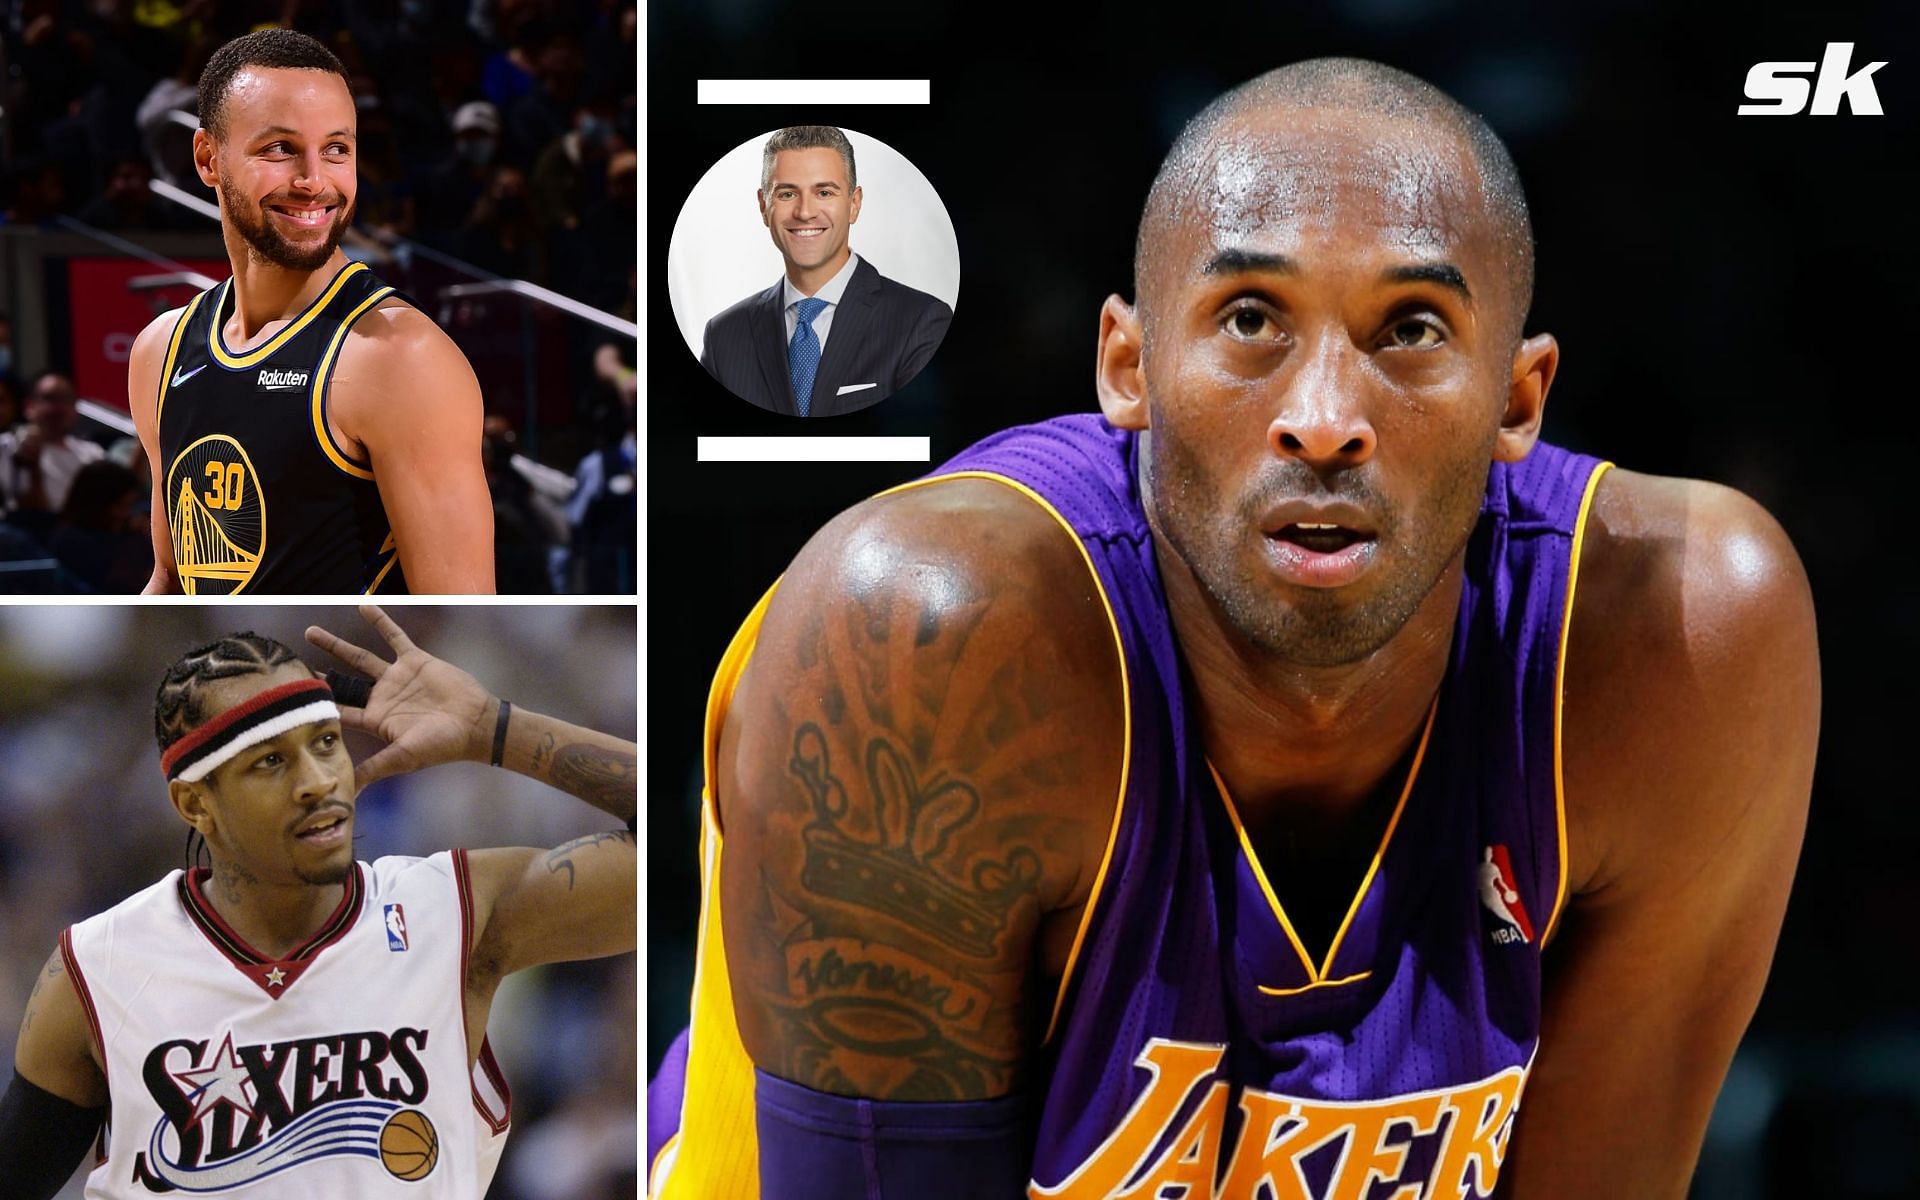 Marreese Speights revealed Kobe Bryant is the best player he has played against.